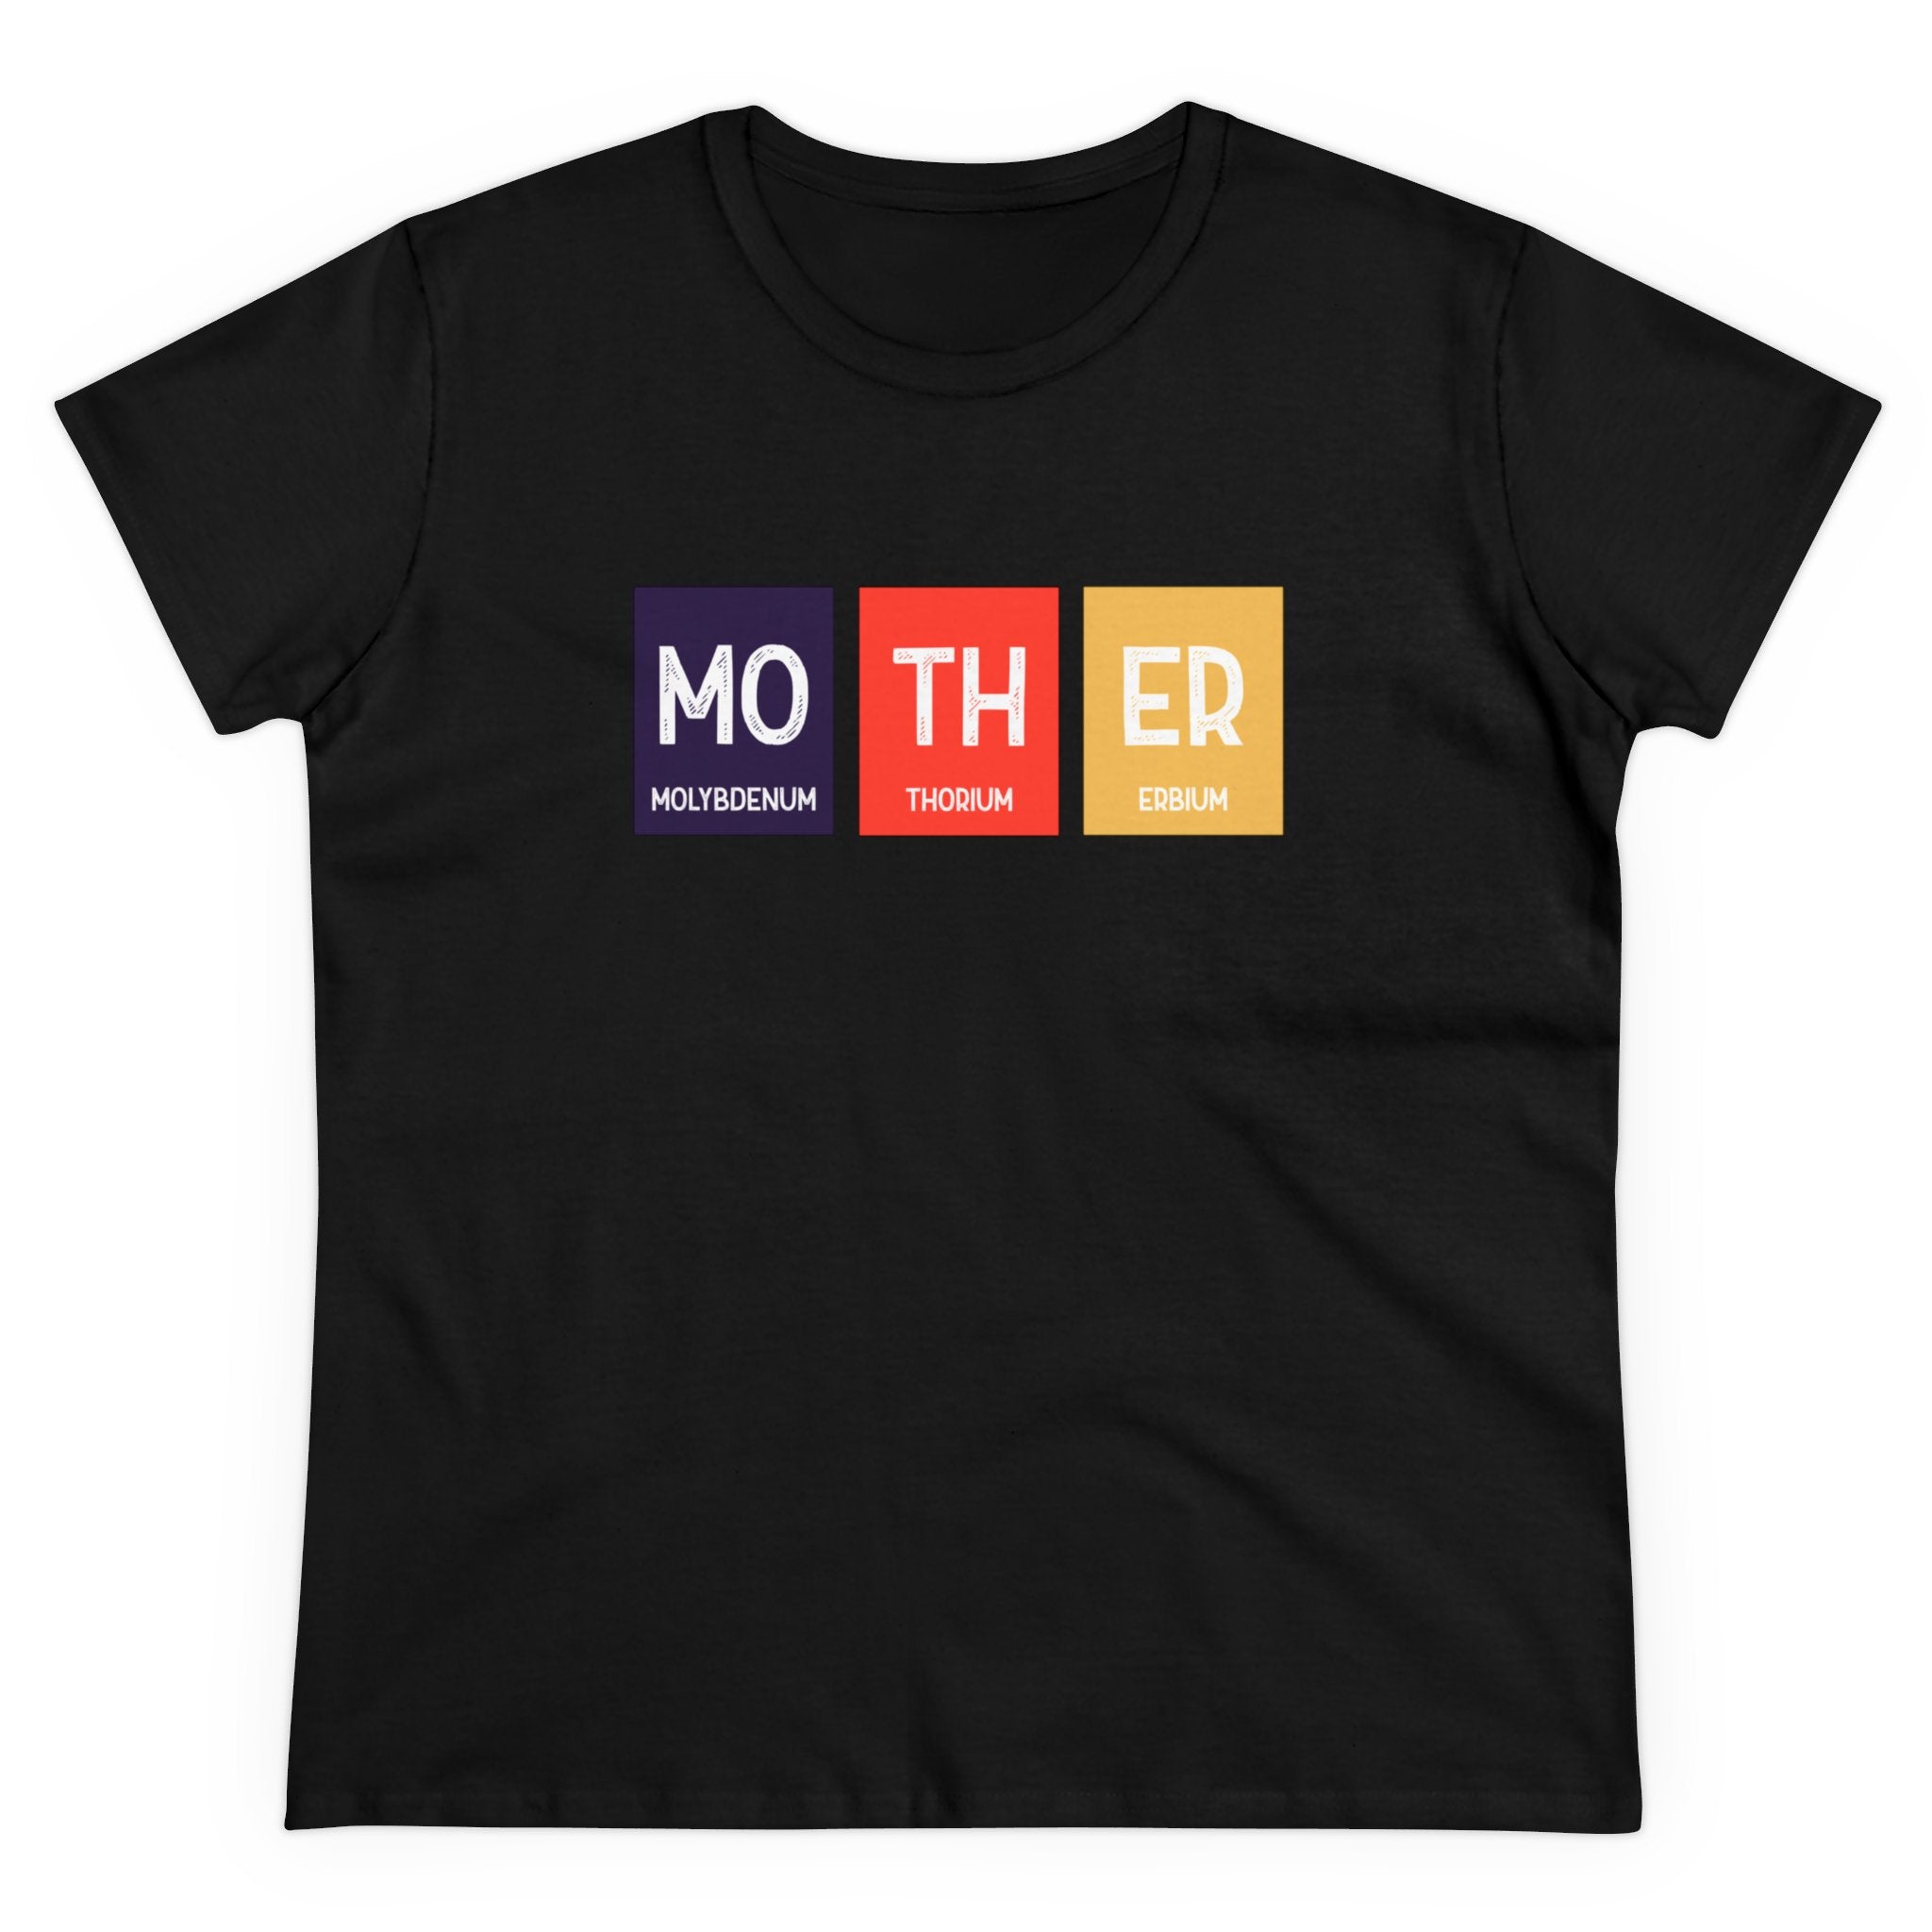 Mo-TH-ER - Women's Tee featuring the word "MOTHER" spelled out using elements from the periodic table: Molybdenum (Mo), Thorium (Th), and Erbium (Er). This stylish and eco-friendly Mo-TH-ER design is perfect for any science enthusiast.